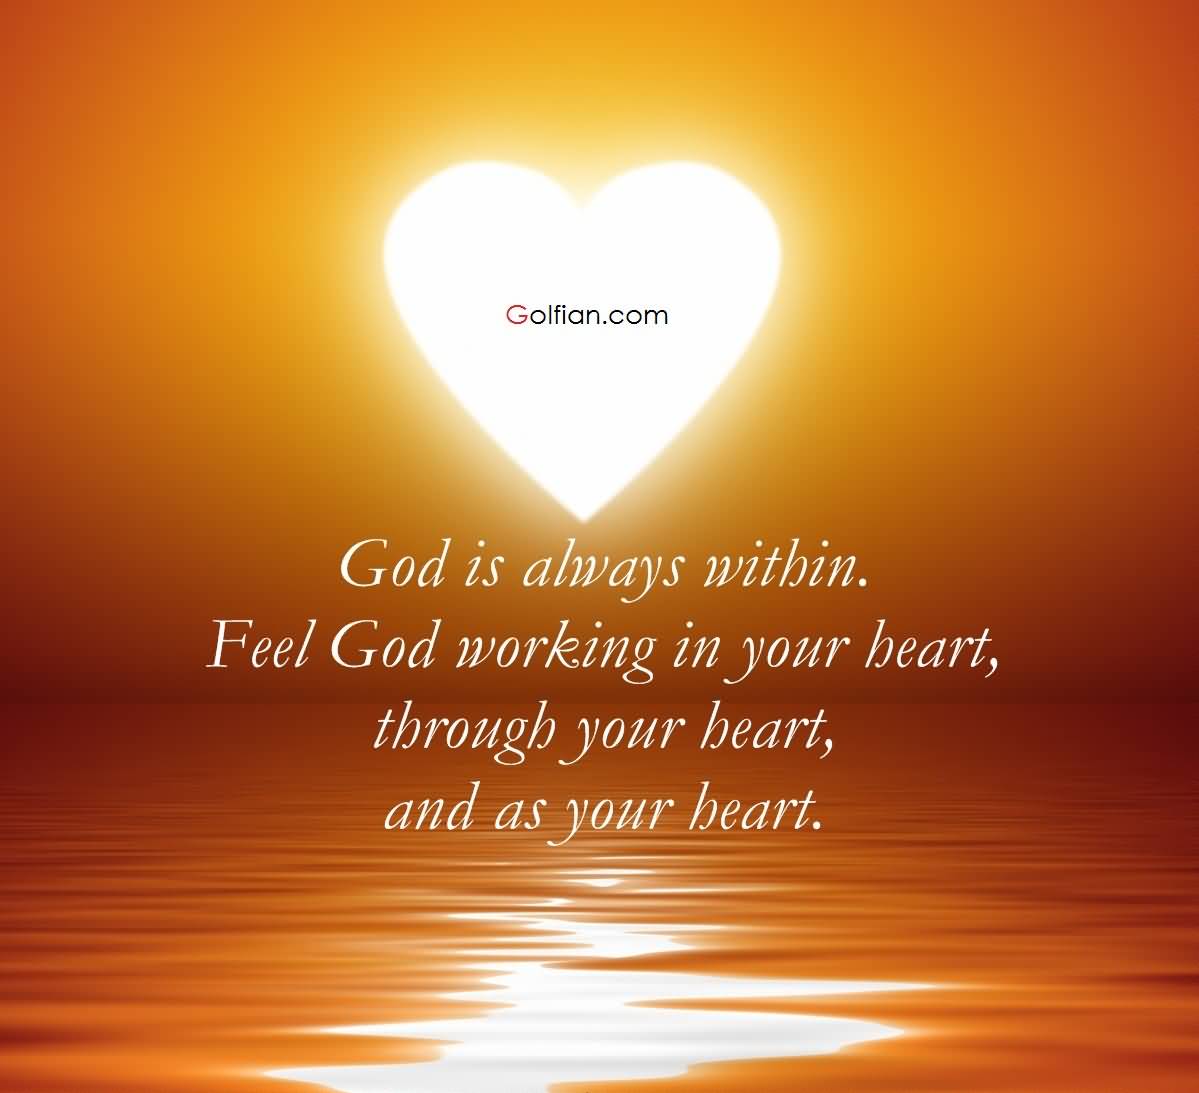 God Quotes Wallpaper - God Is In Your Heart Quotes - HD Wallpaper 